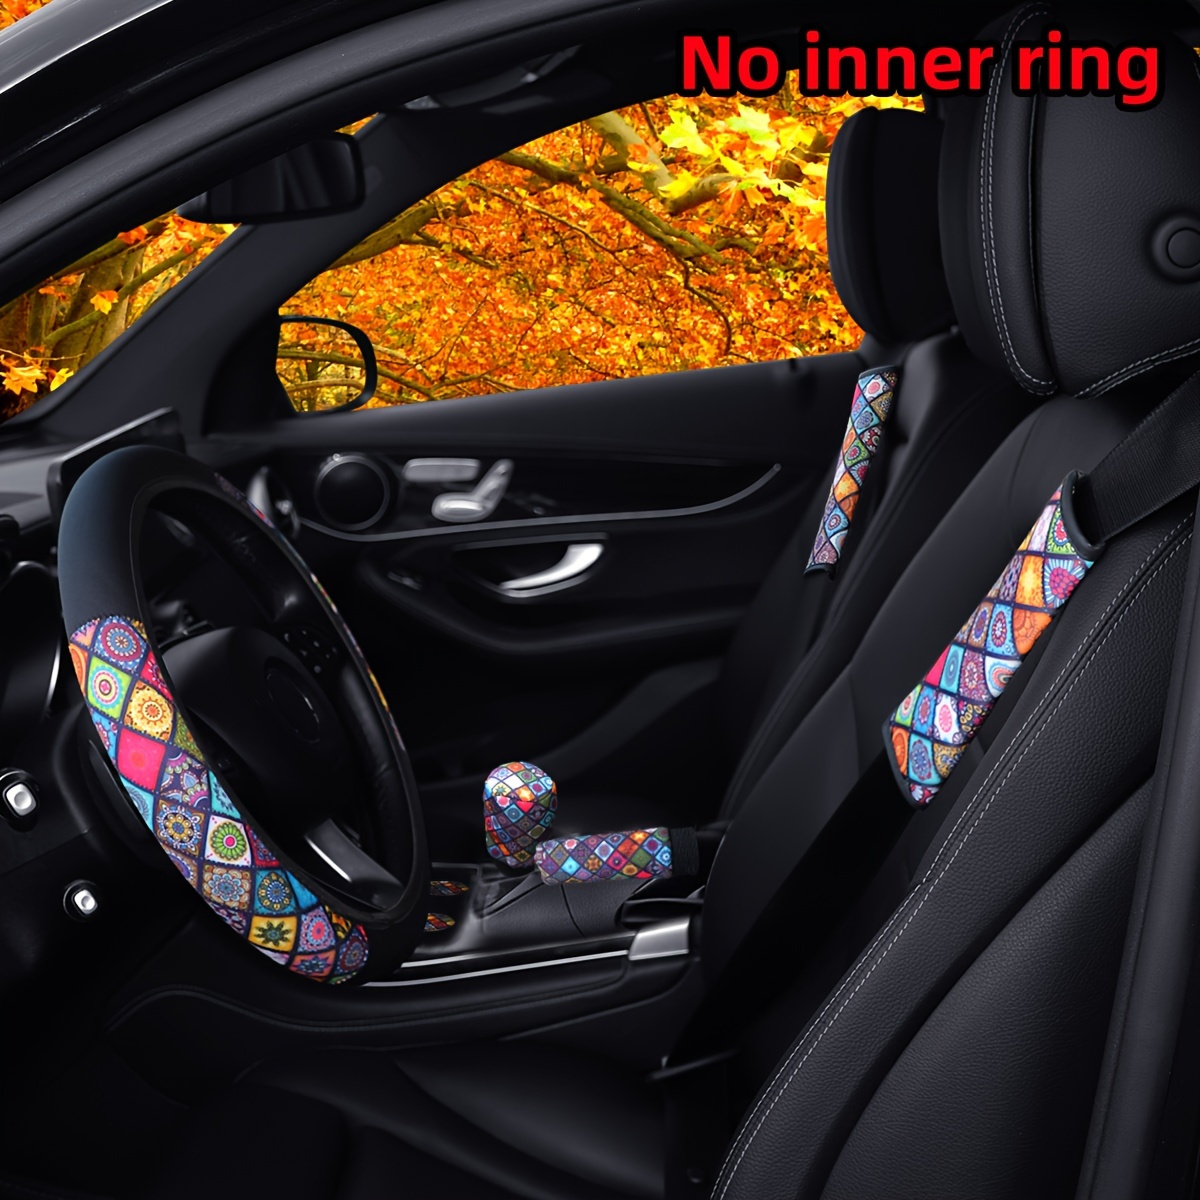 

7pcs Colorful Grid Dynamic Soft Car Steering Wheel Cover Without Inner Ring Seat Belt Shoulder Pad Cover Handbrake Cover Gear Shift Cover